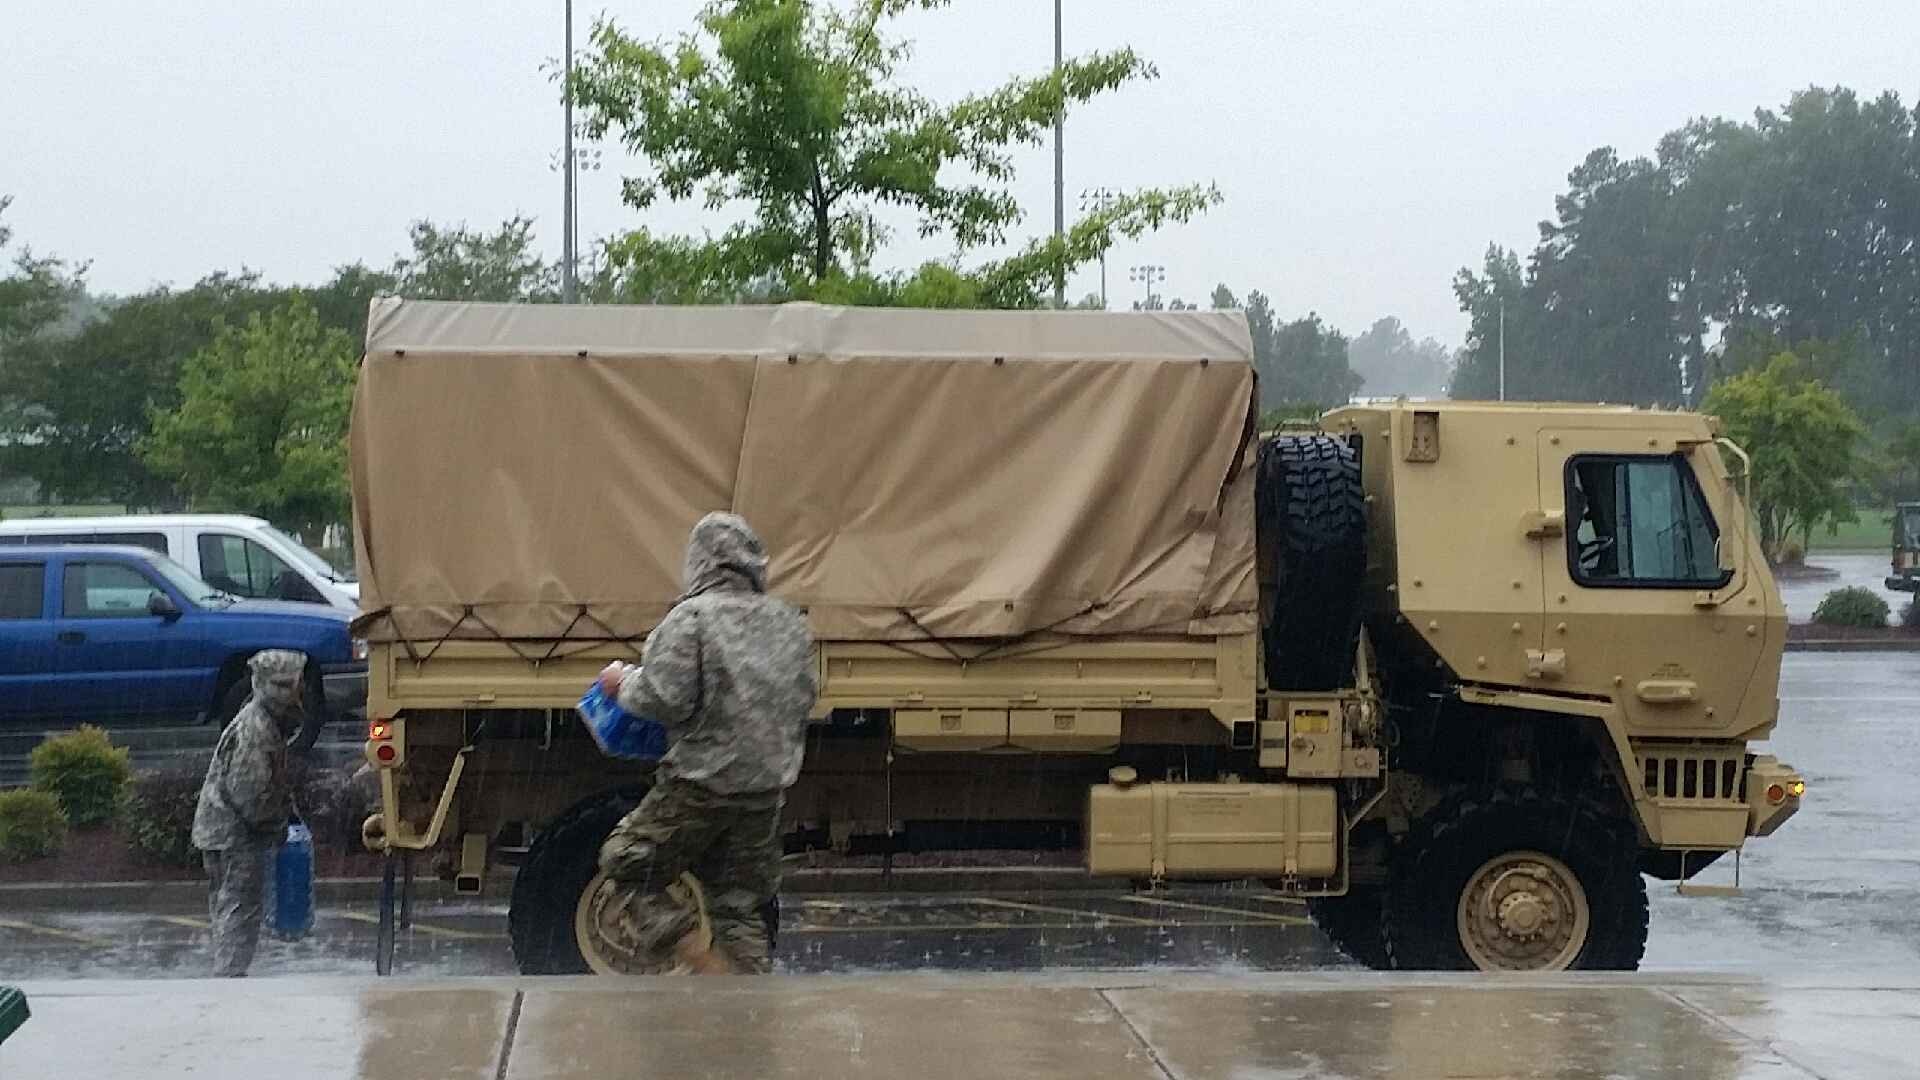 The South Carolina National Guard has assets staged throughout the lowcountry and along the coast to respond to emergency situations during and after Hurricane Matthew, including vehicles that can transport medical personnel and other first responders through high-water areas and engineer assets to help clear debris in the aftermath. 